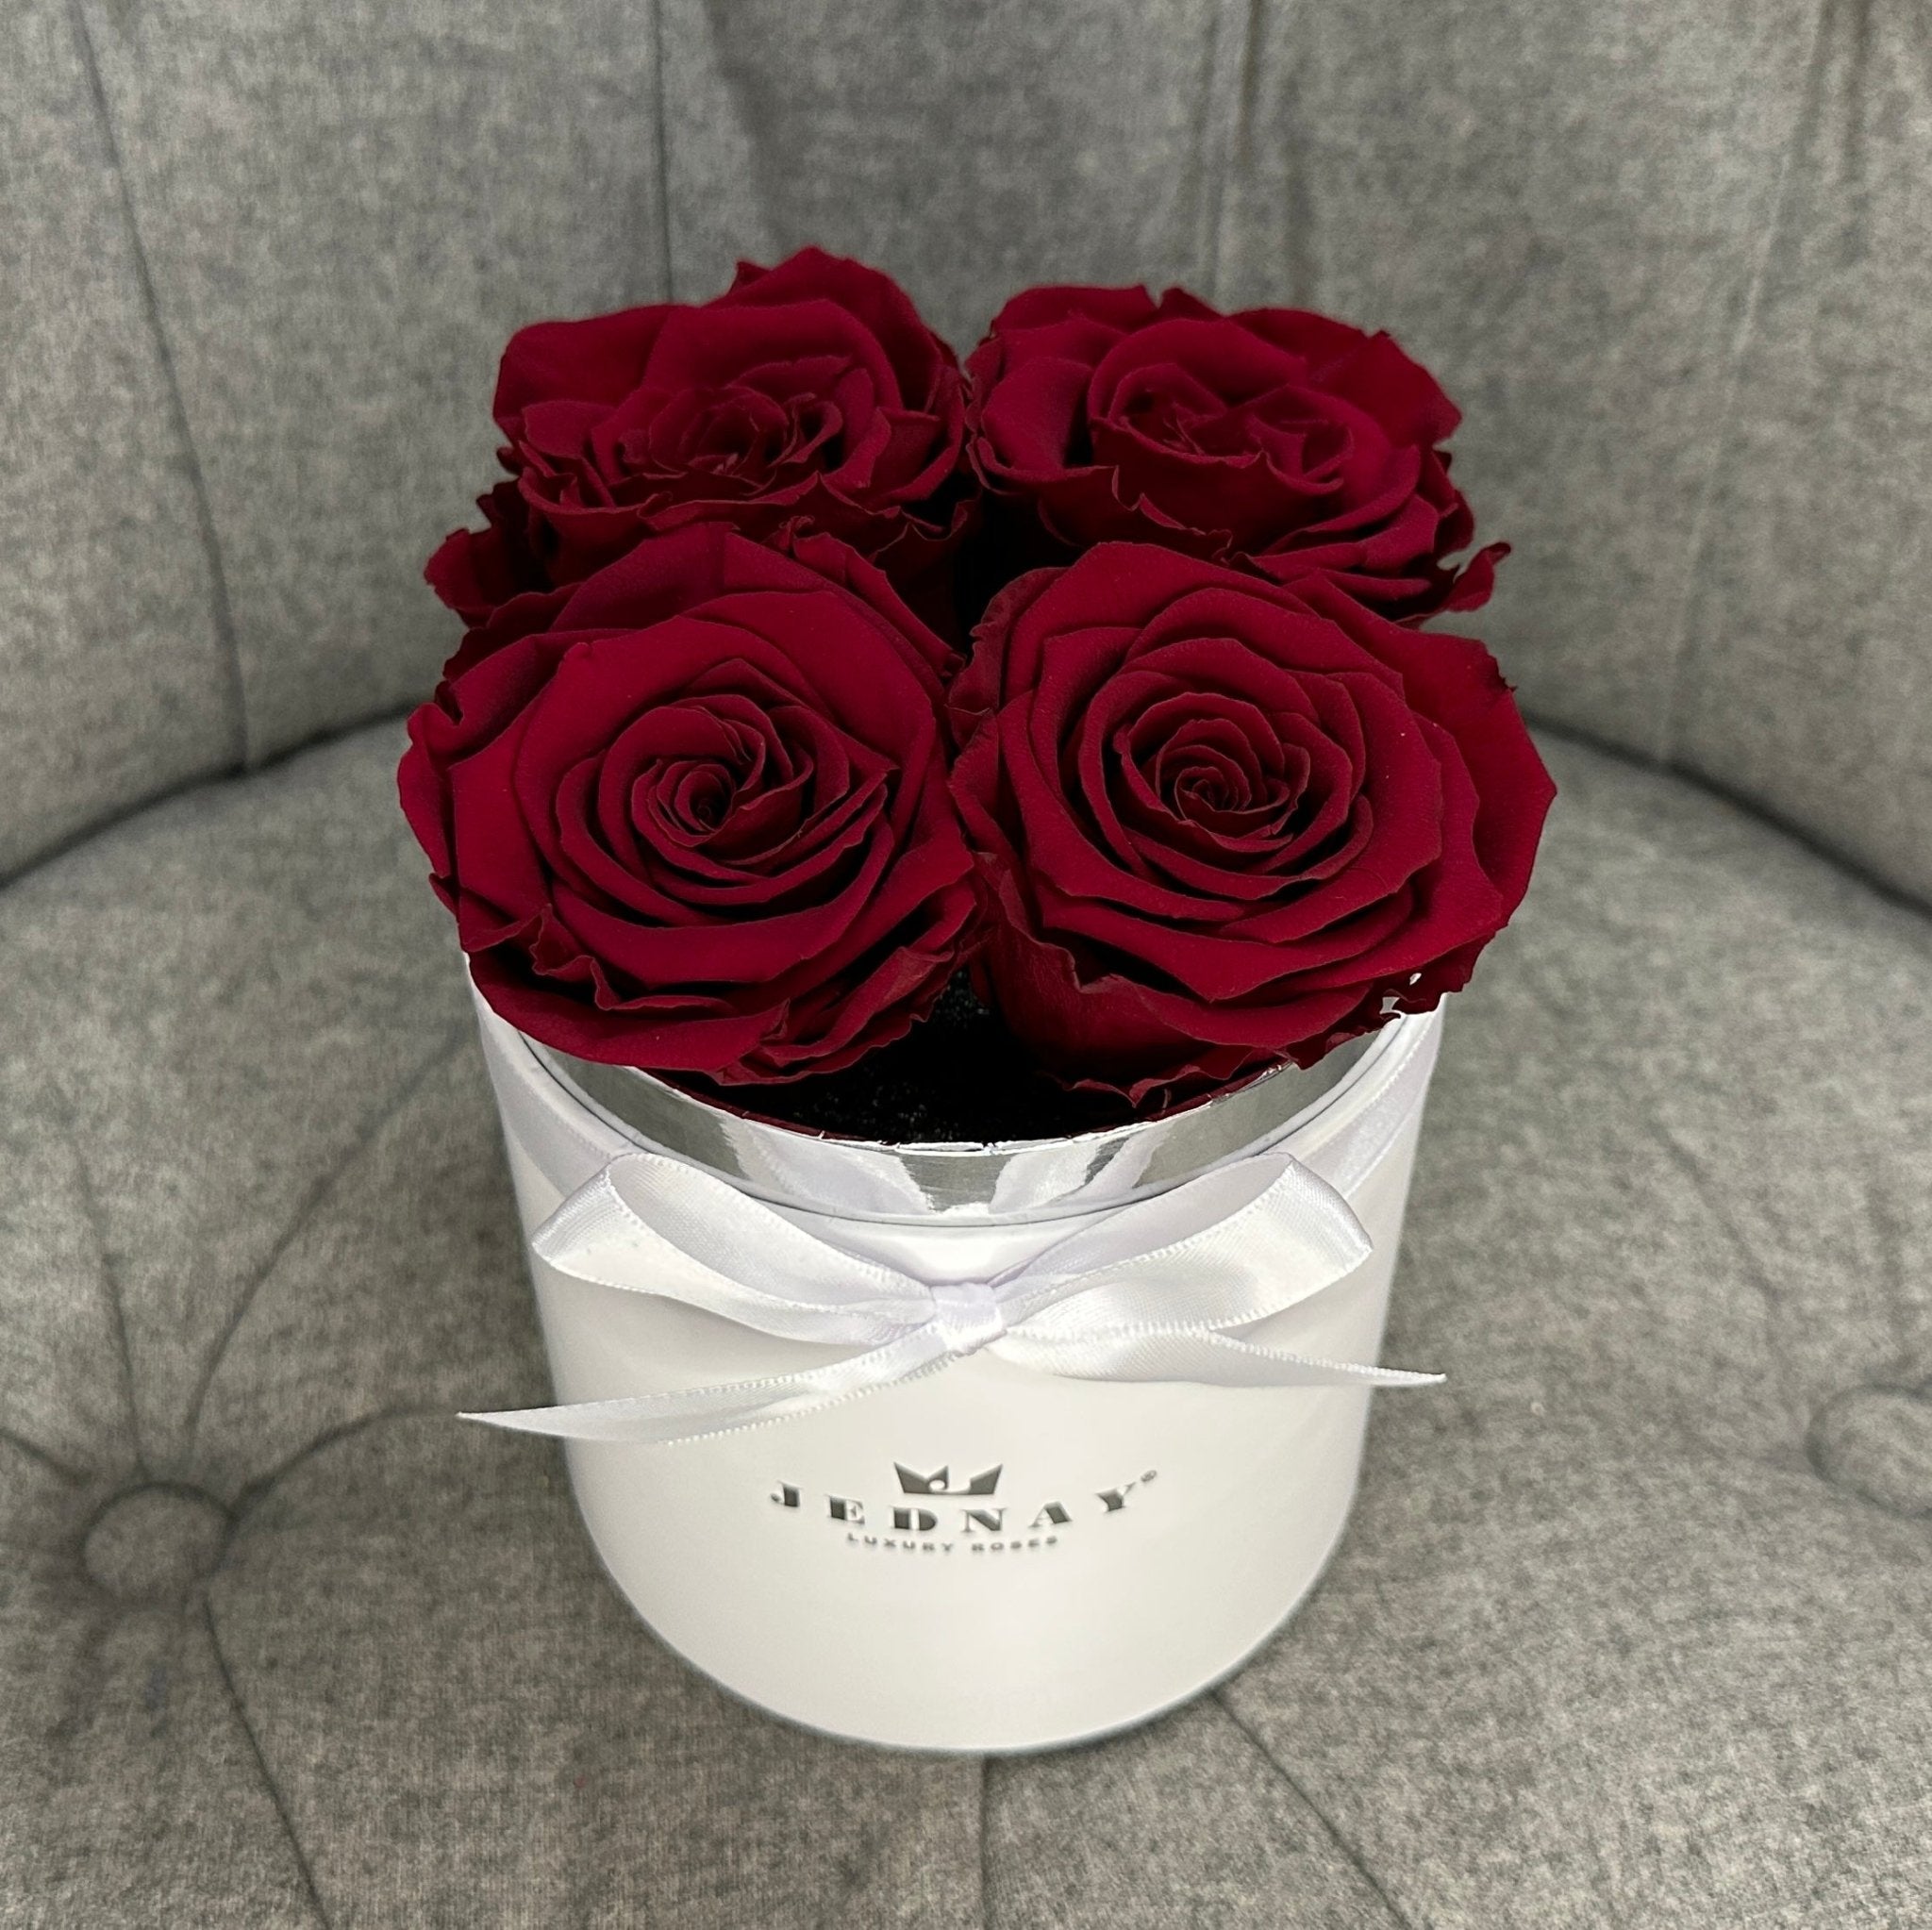 Petite Classic White Forever Rose Box - Red Red Wine Eternal Roses - Jednay Roses